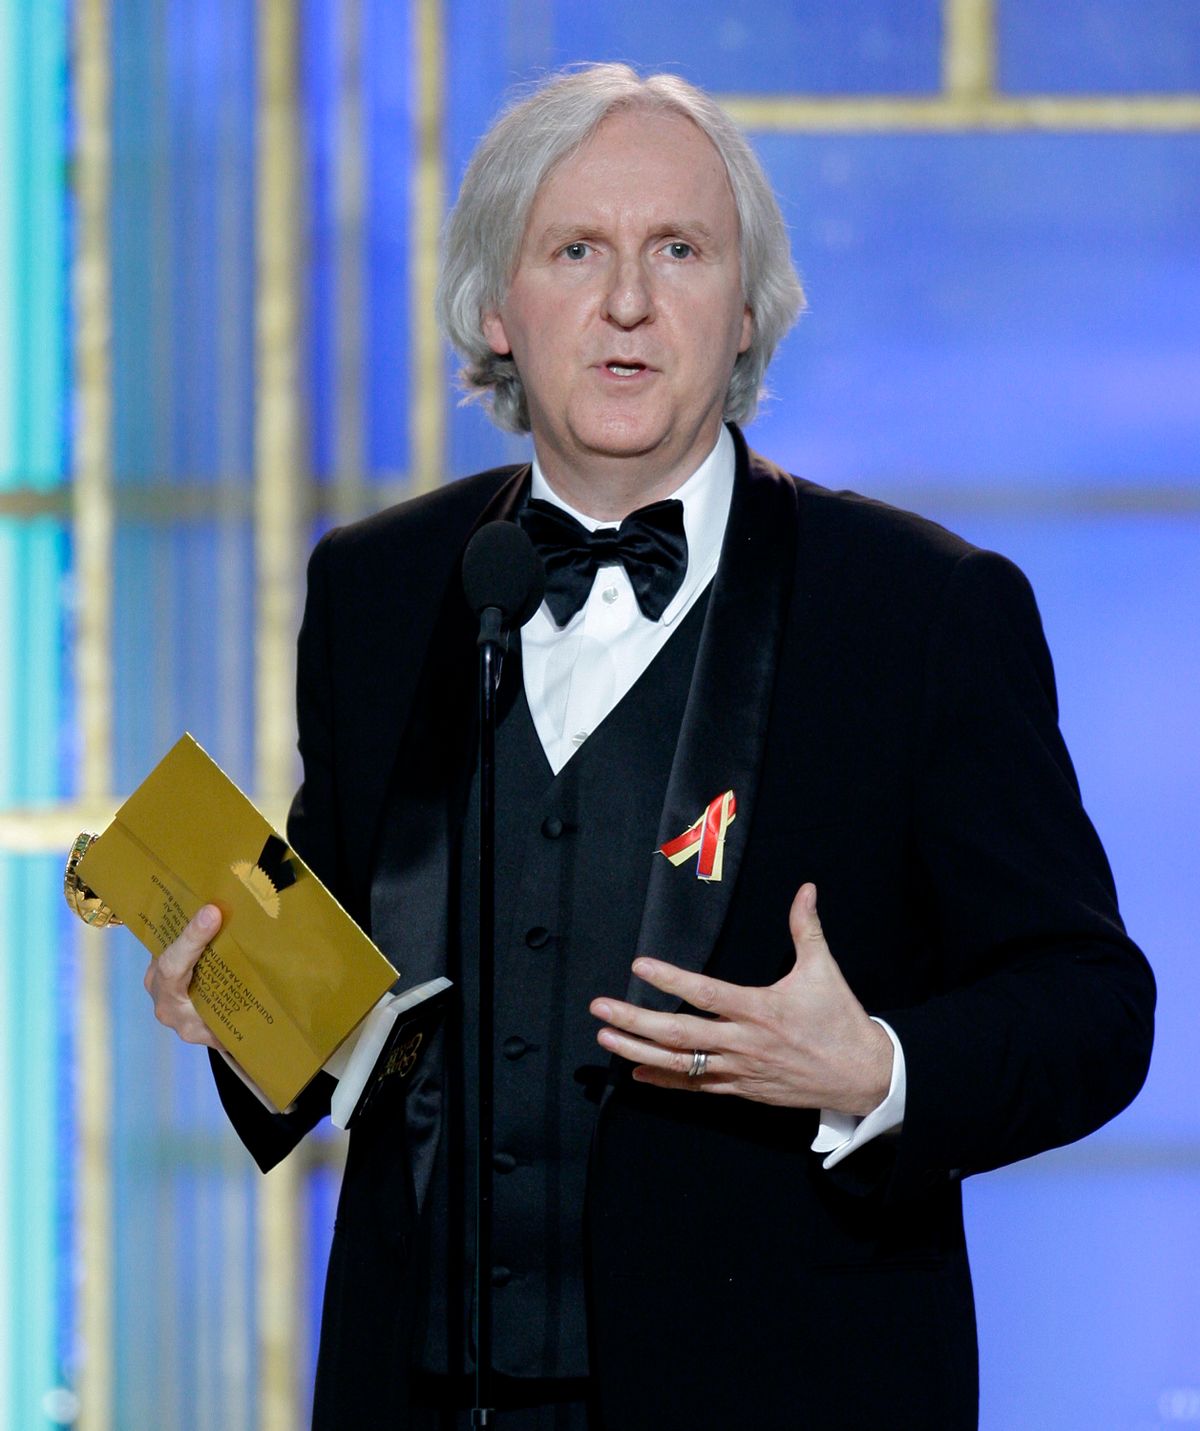 67th ANNUAL GOLDEN GLOBE AWARDS -- Pictured: James Cameron on stage during the 67th Annual Golden Globe Awards held at the Beverly Hilton Hotel on January 17, 2010 - (NBC Photo by: Paul Drinkwater/NBCU Photo Bank via AP Images) (Associated Press)